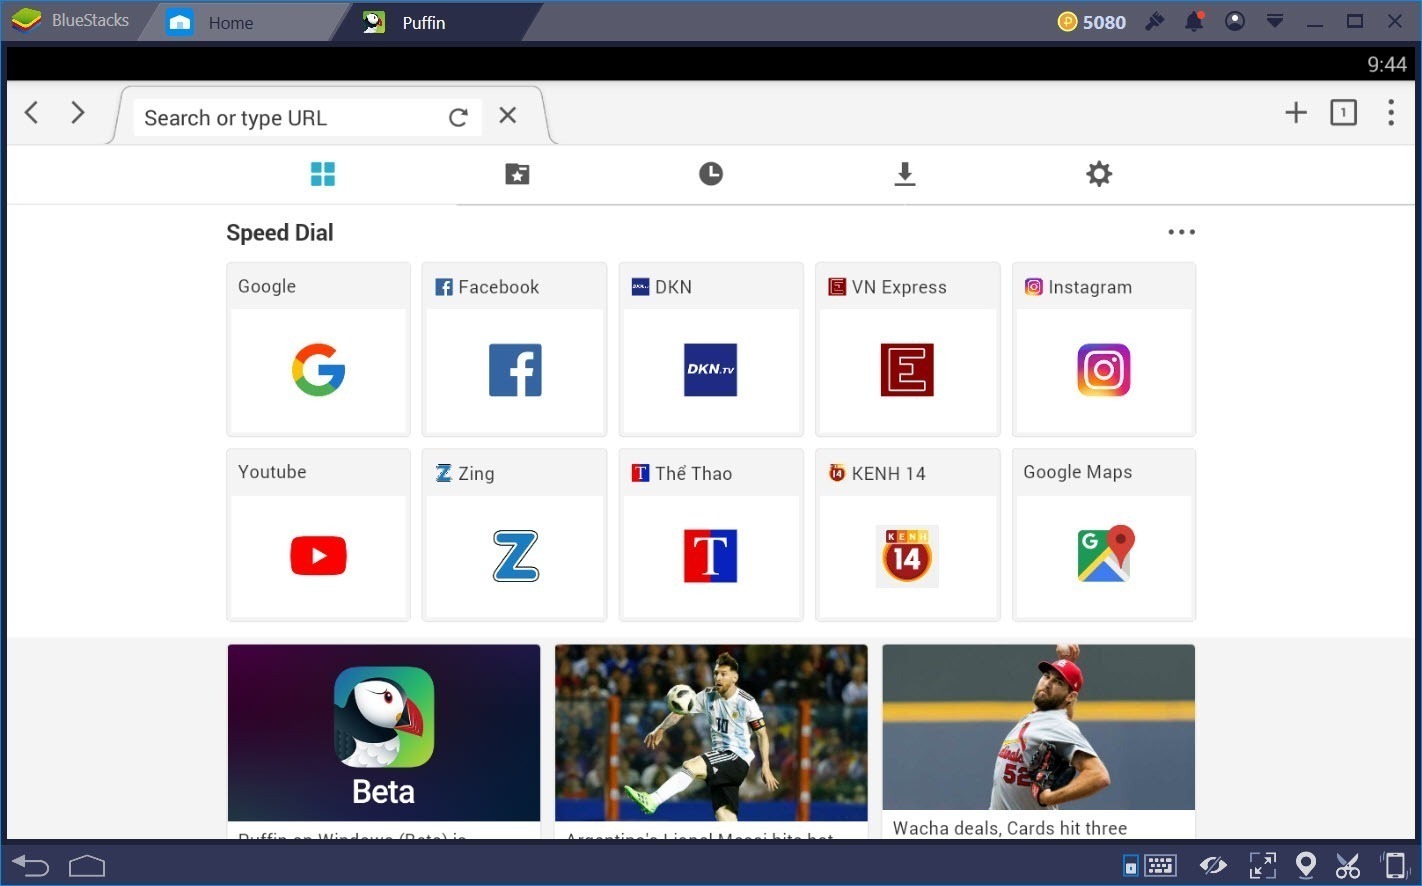 How to Download Puffin Browser on PC